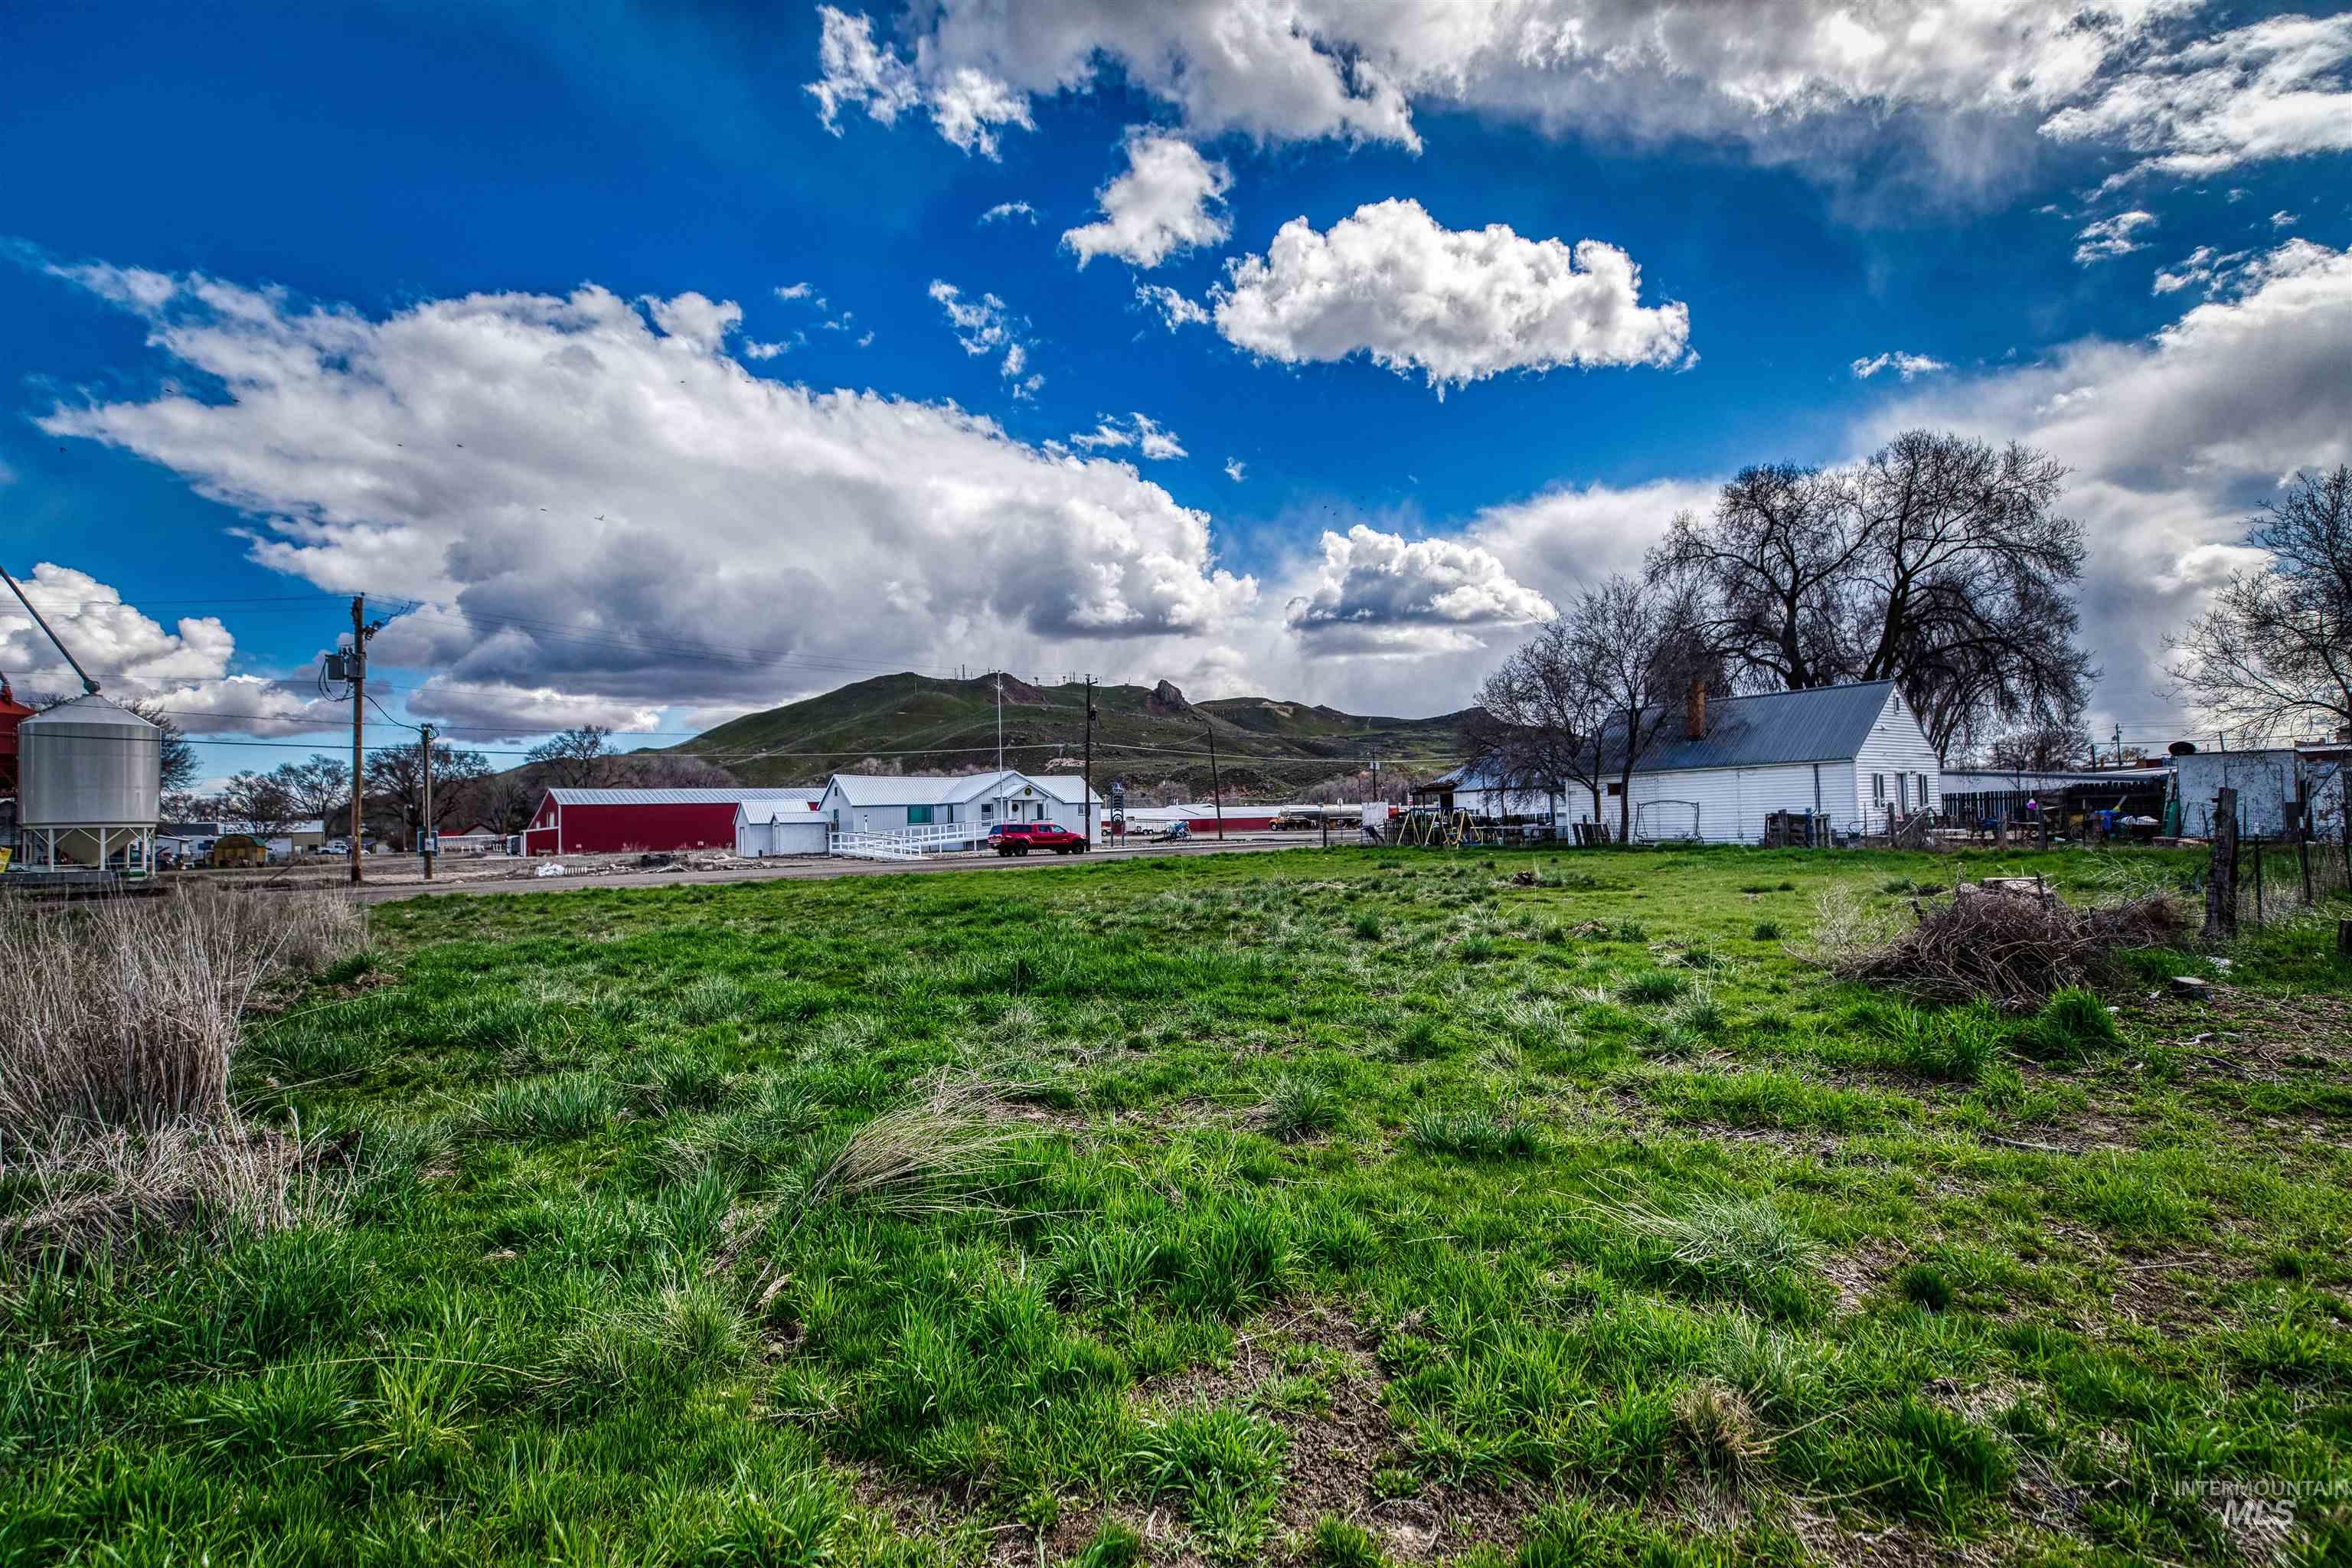 TBD Main St (tax lot 102), Vale, Oregon 97918, Land For Sale, Price $15,000,MLS 98904745